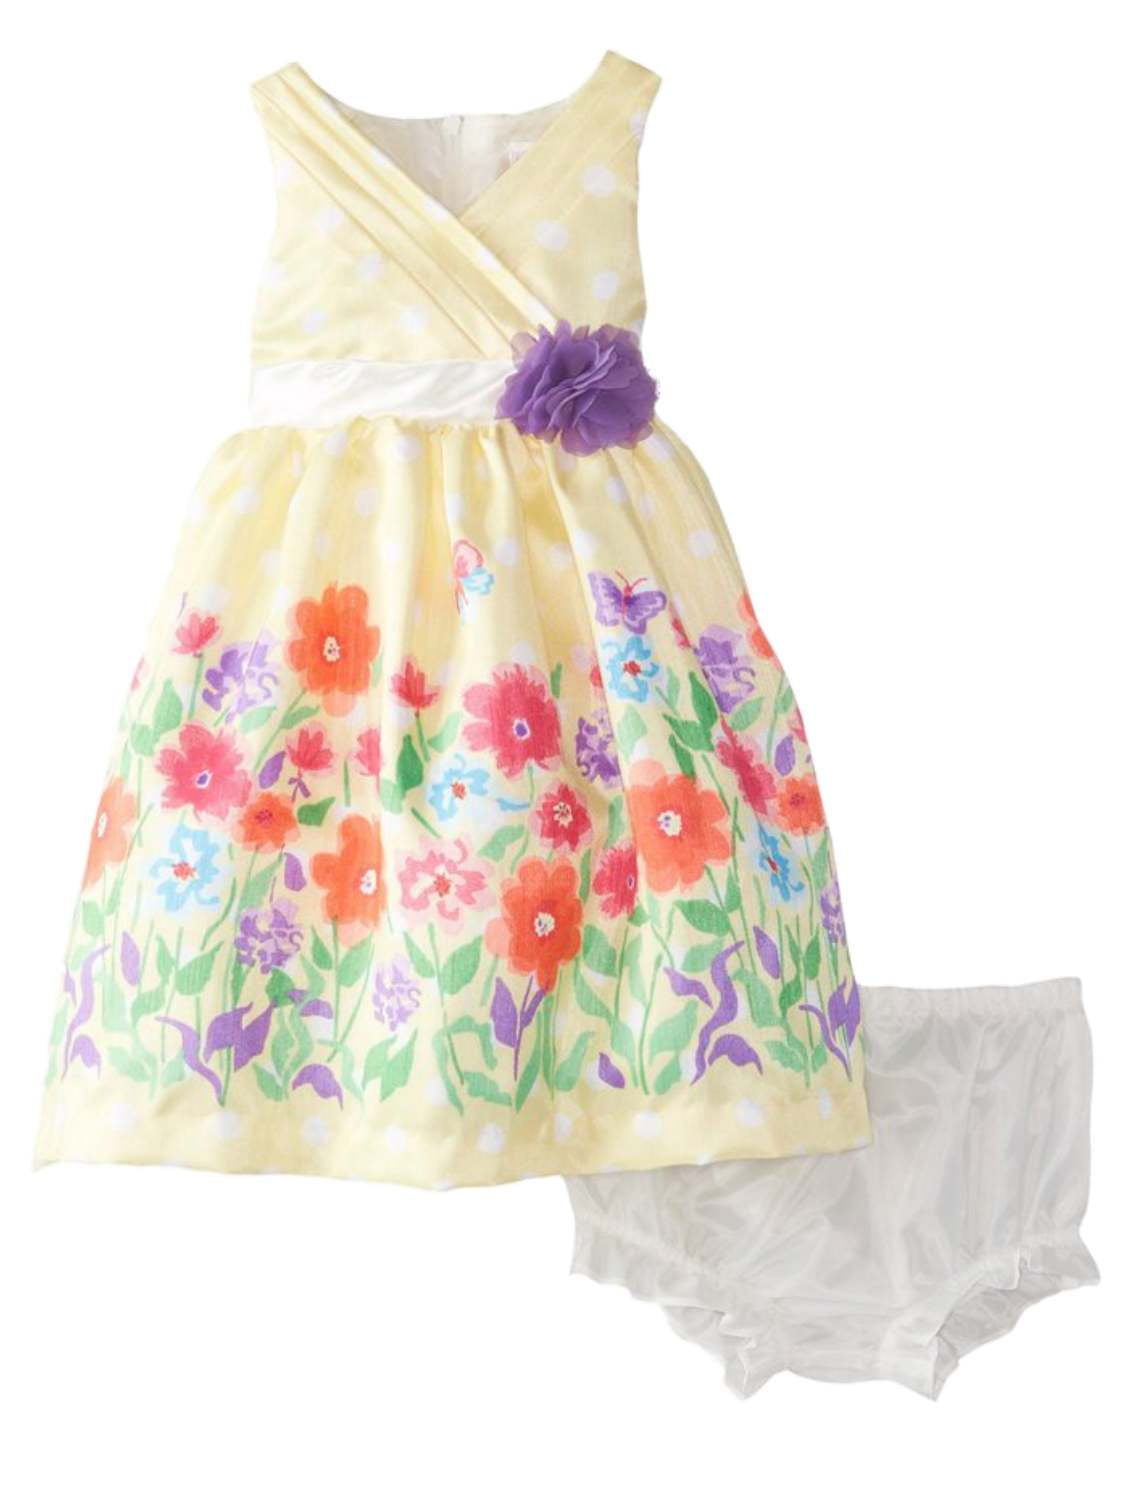 New Girls Floral Party Dress in Pink White Yellow From 9-12 Months to 2-3 Years 